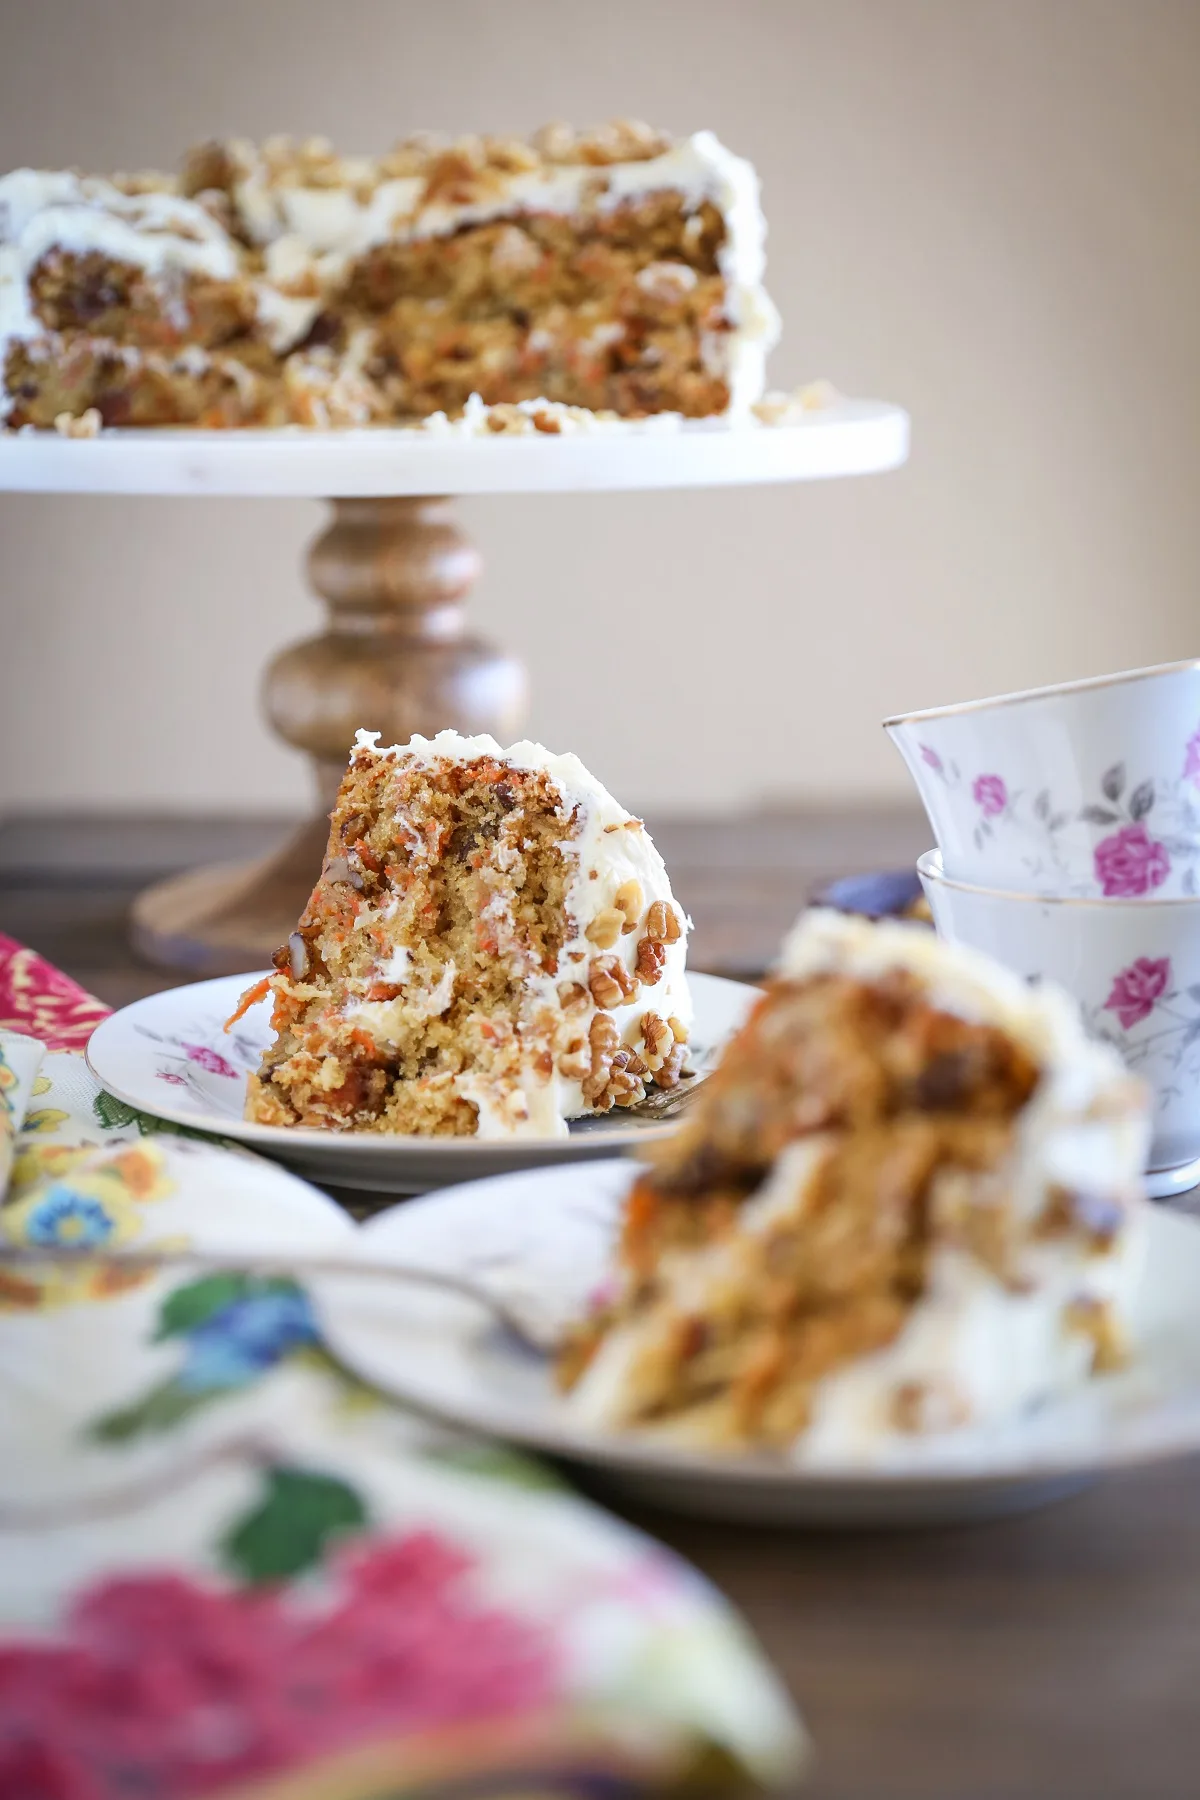 two slices of carrot cake on two plates with a cake stand with the rest of the carrot cake in the background.